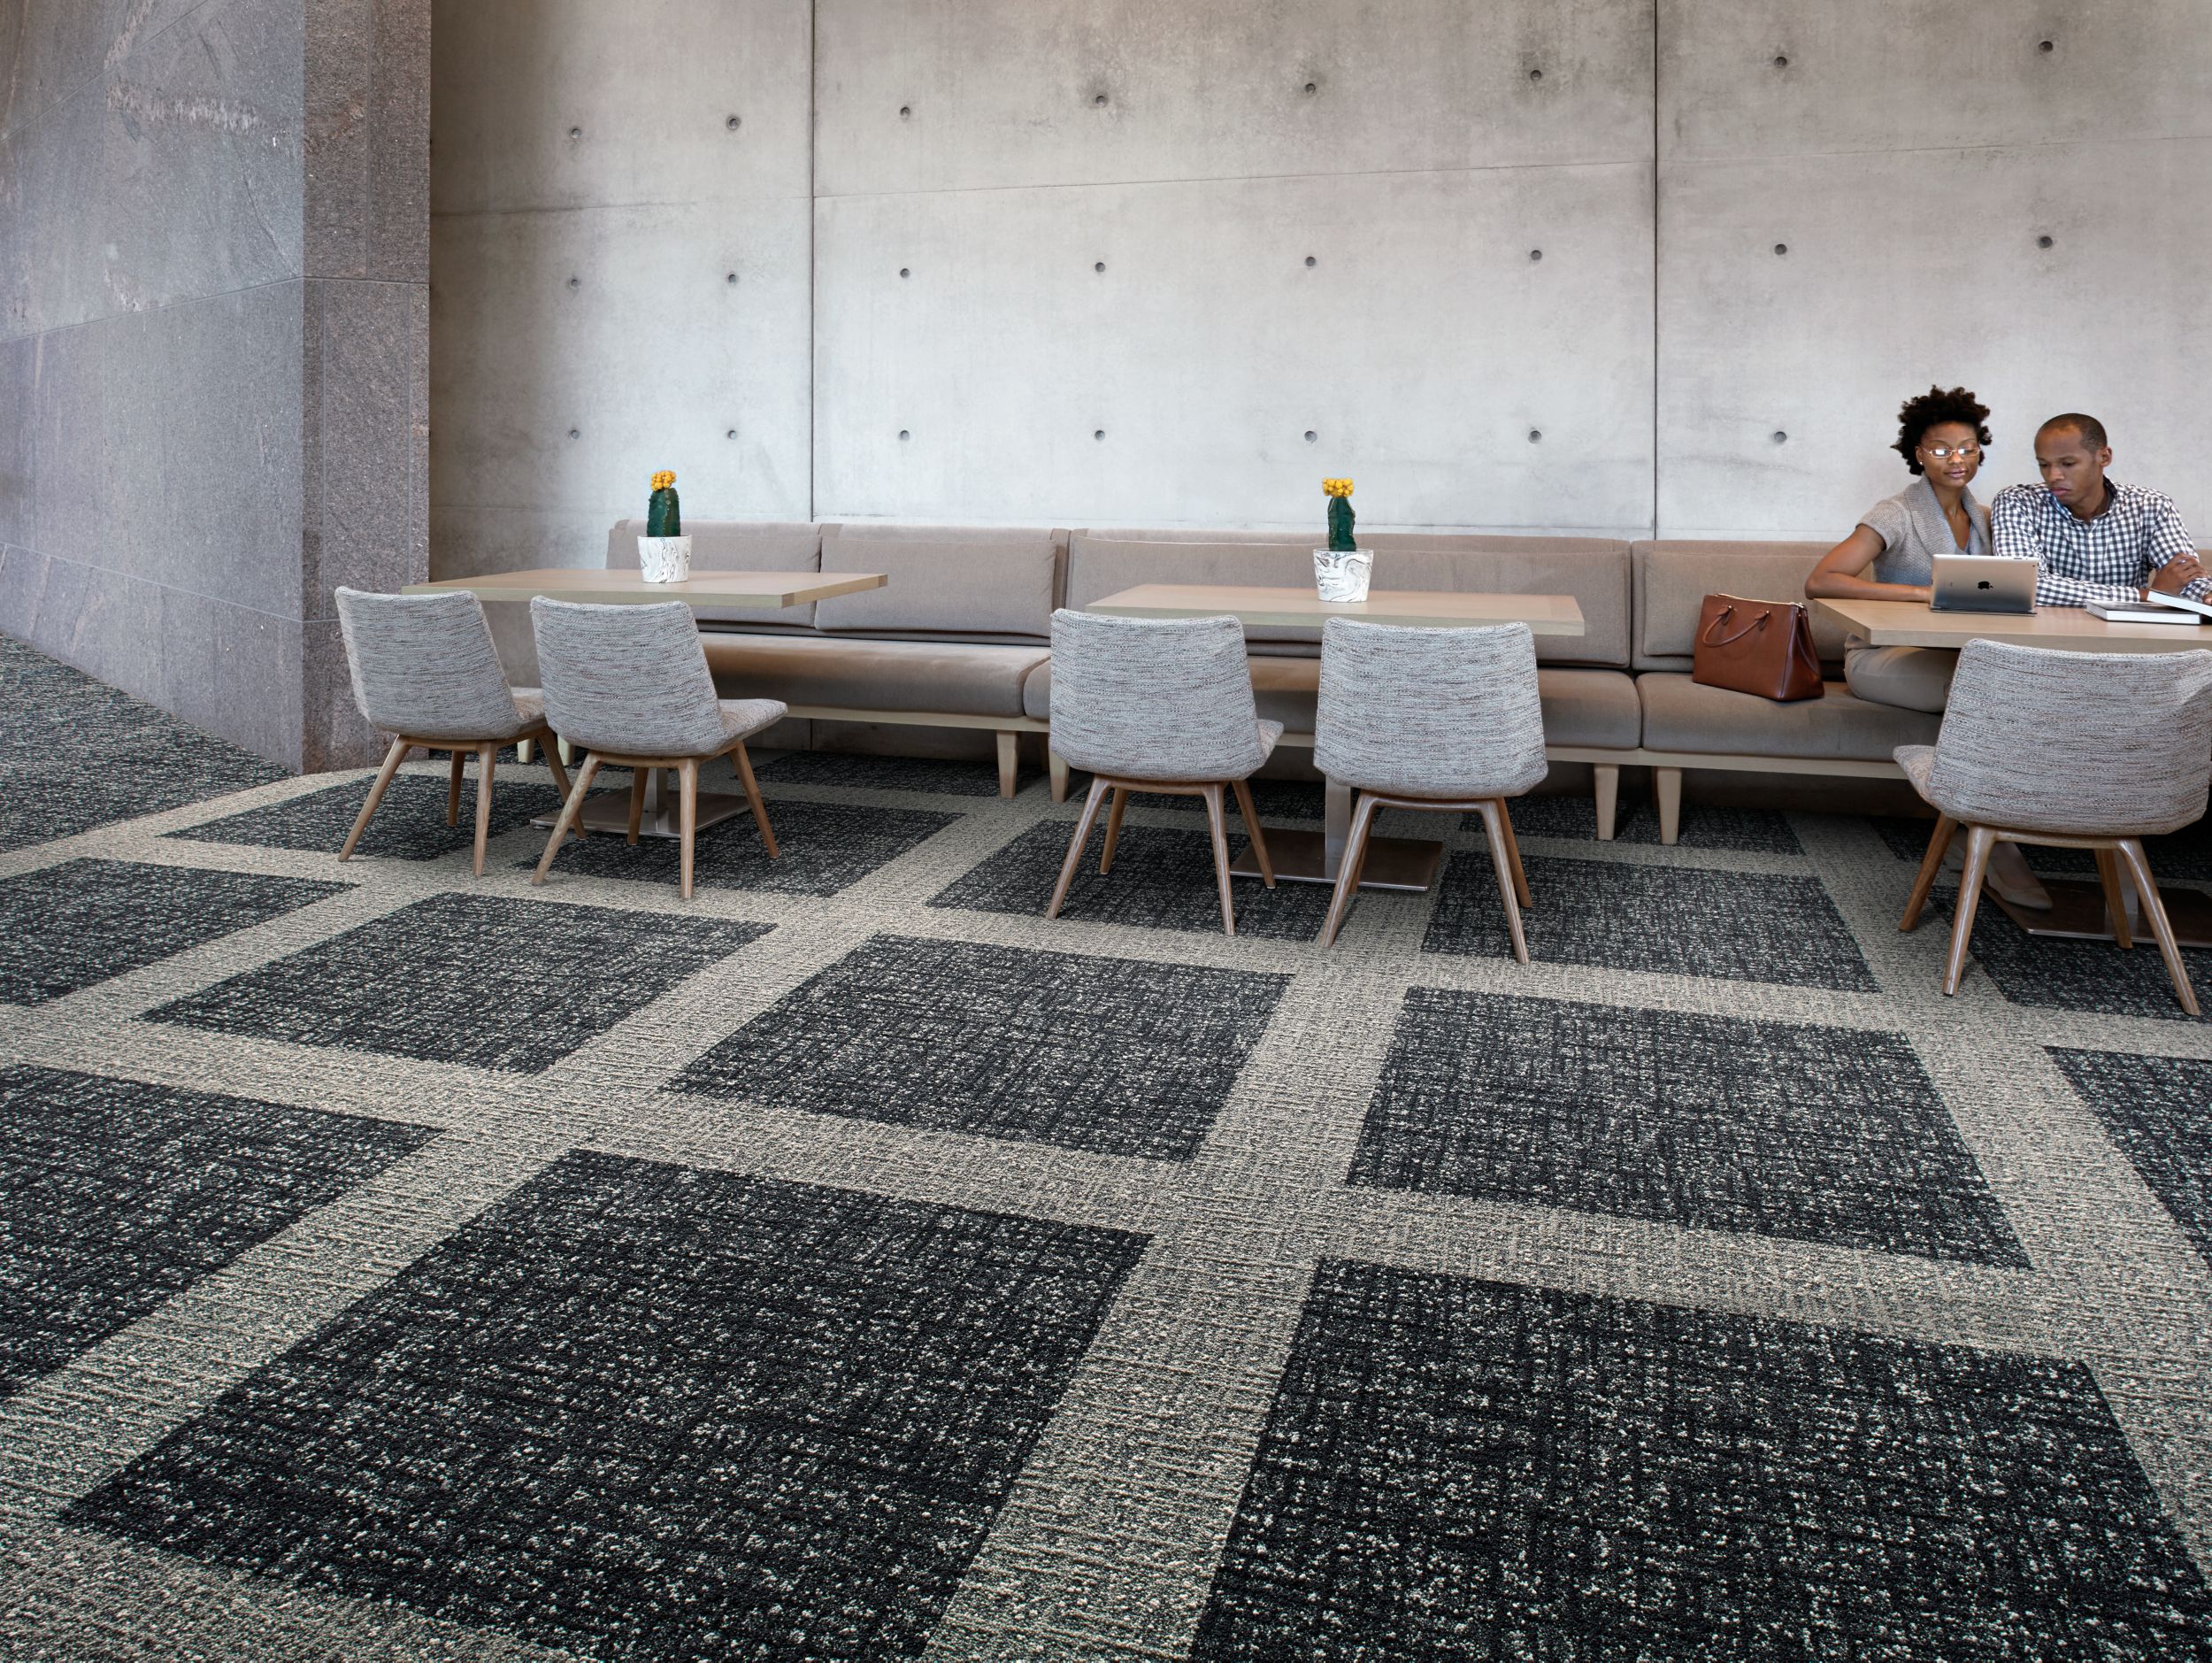 Interface WW895 plank carpet tile and Textured Woodgrains LVT in office common area with tables and chairs Bildnummer 2